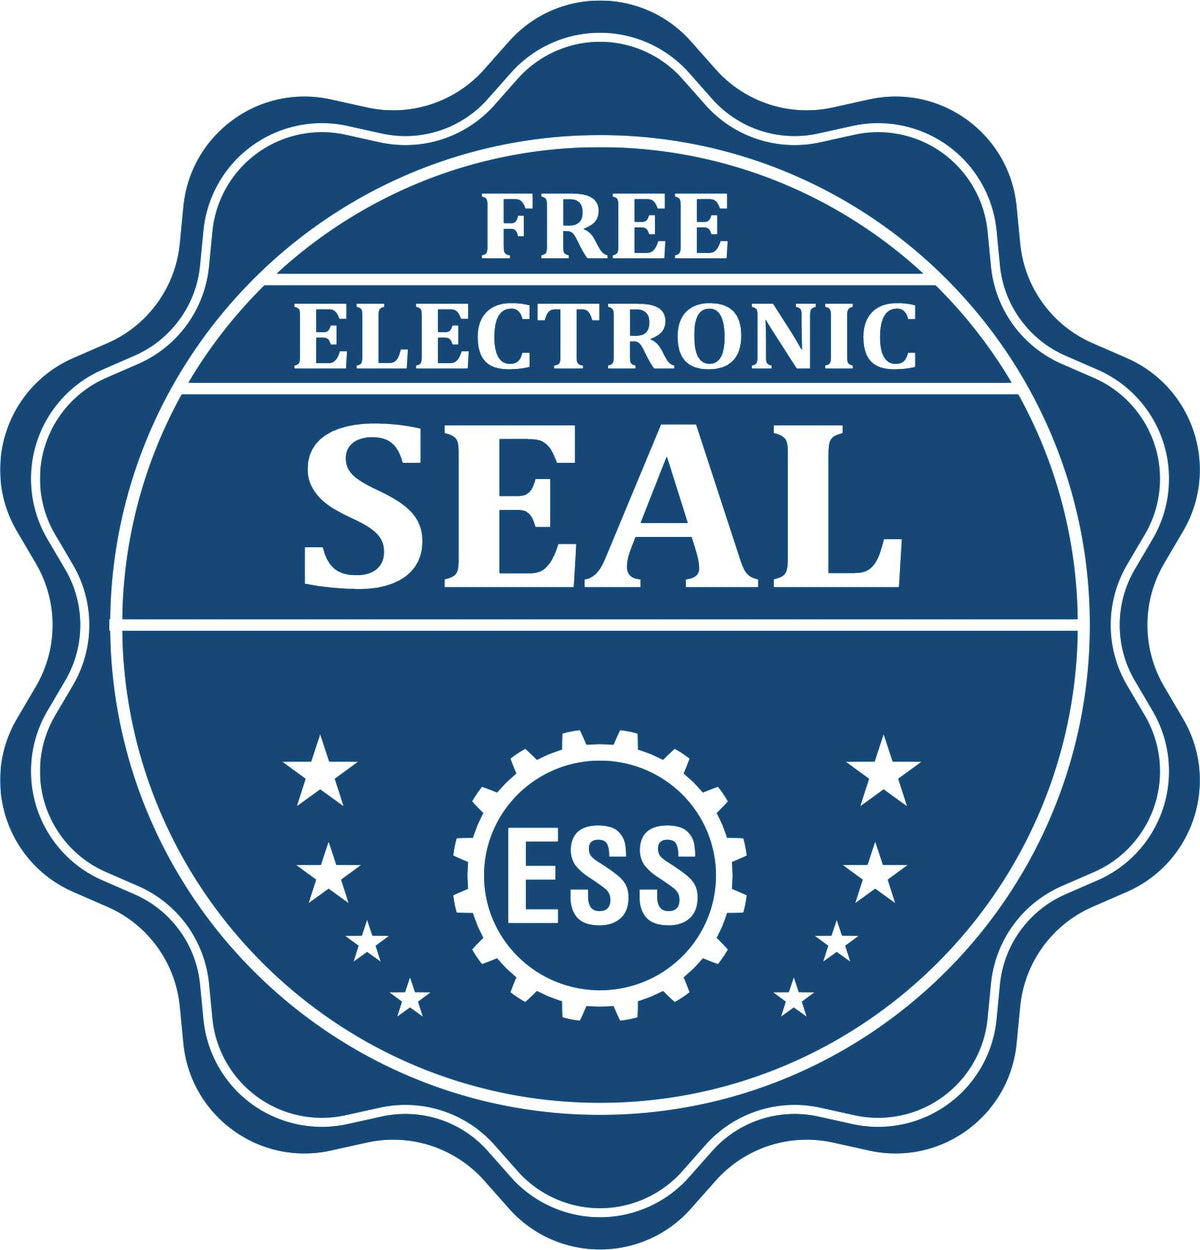 A badge showing a free electronic seal for the Premium MaxLight Pre-Inked Guam Engineering Stamp with stars and the ESS gear on the emblem.